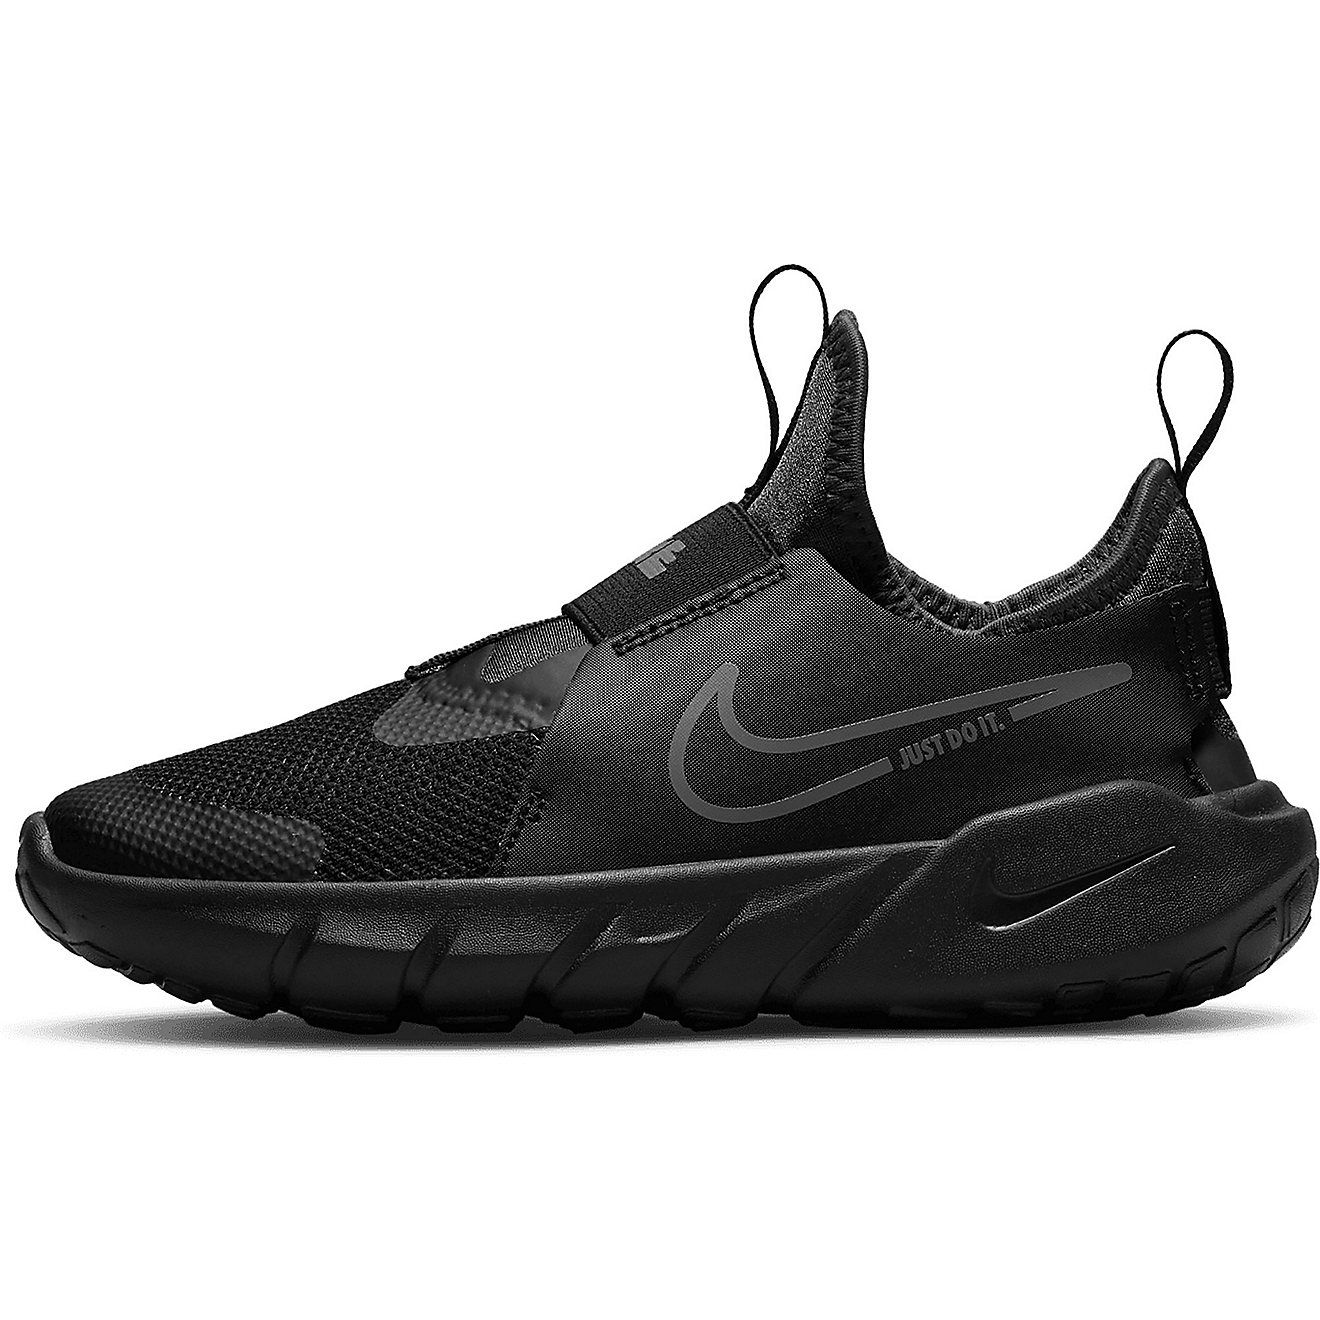 Nike Kids' Flex Runner 2 PS | Free Shipping at Academy | Academy Sports + Outdoors